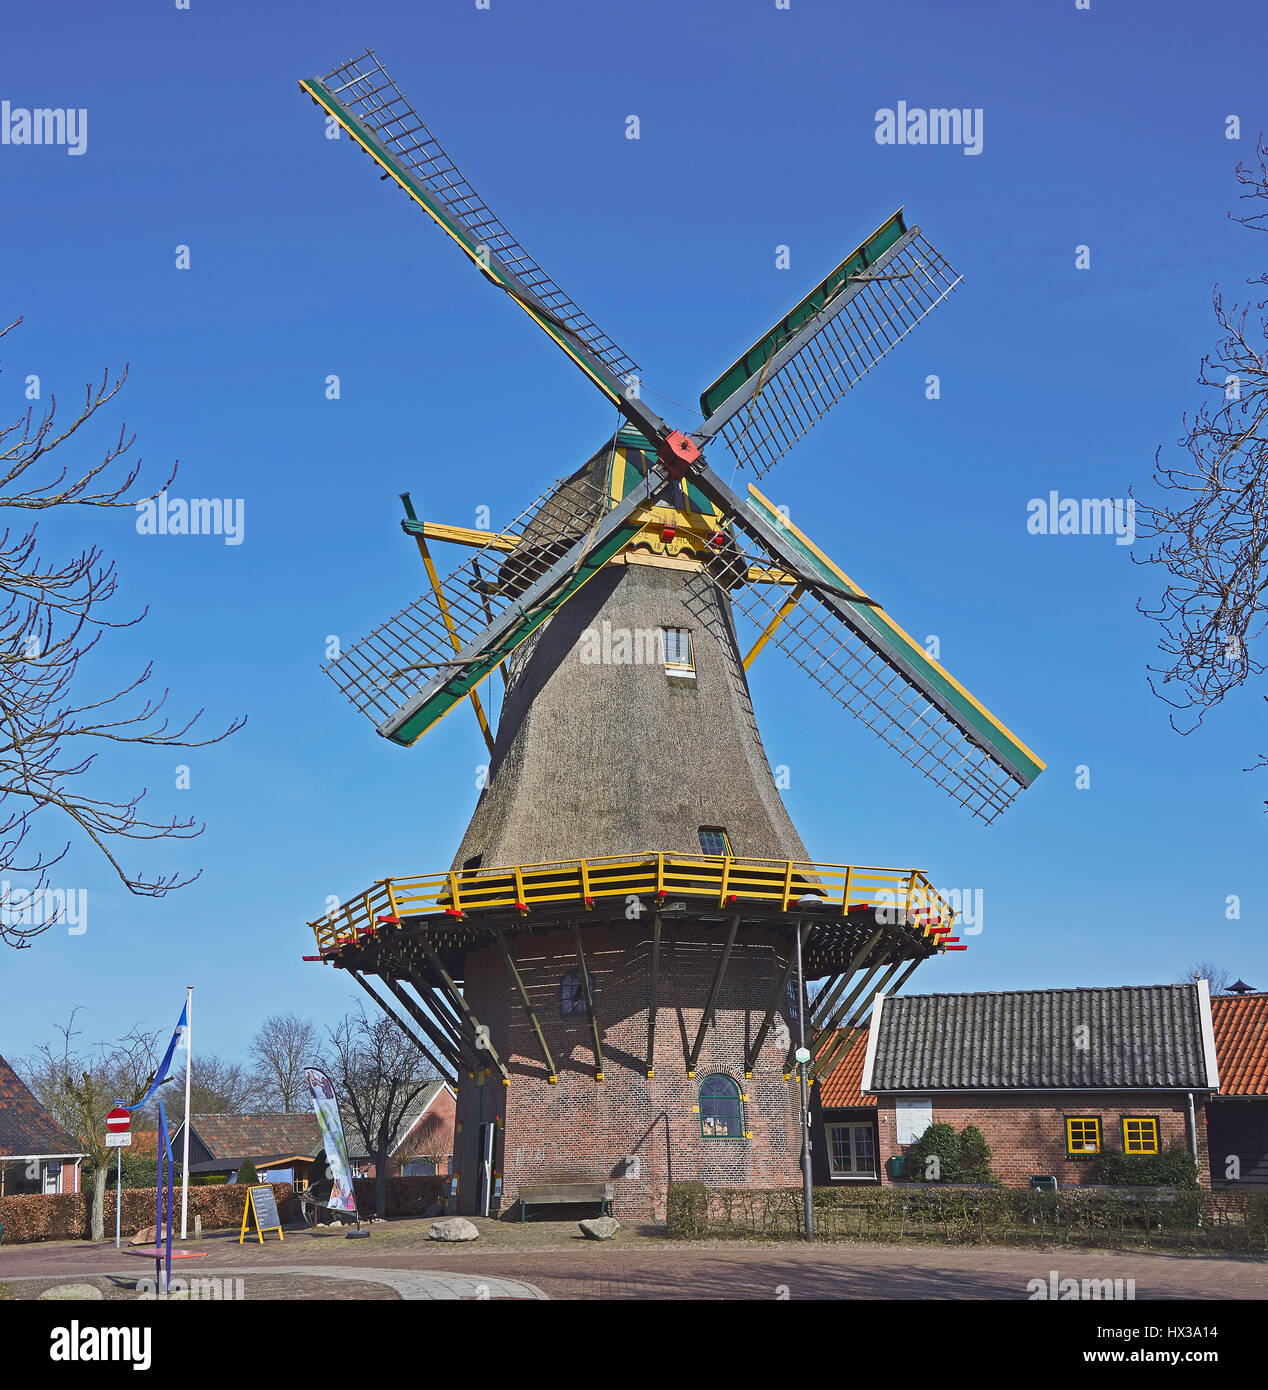 Grain mill 'De Hoop' or 'Molen van Buursink' in Markelo, the Netherlands, with green, red and yellow painted wooden parts, against a beautiful blue sk Stock Photo